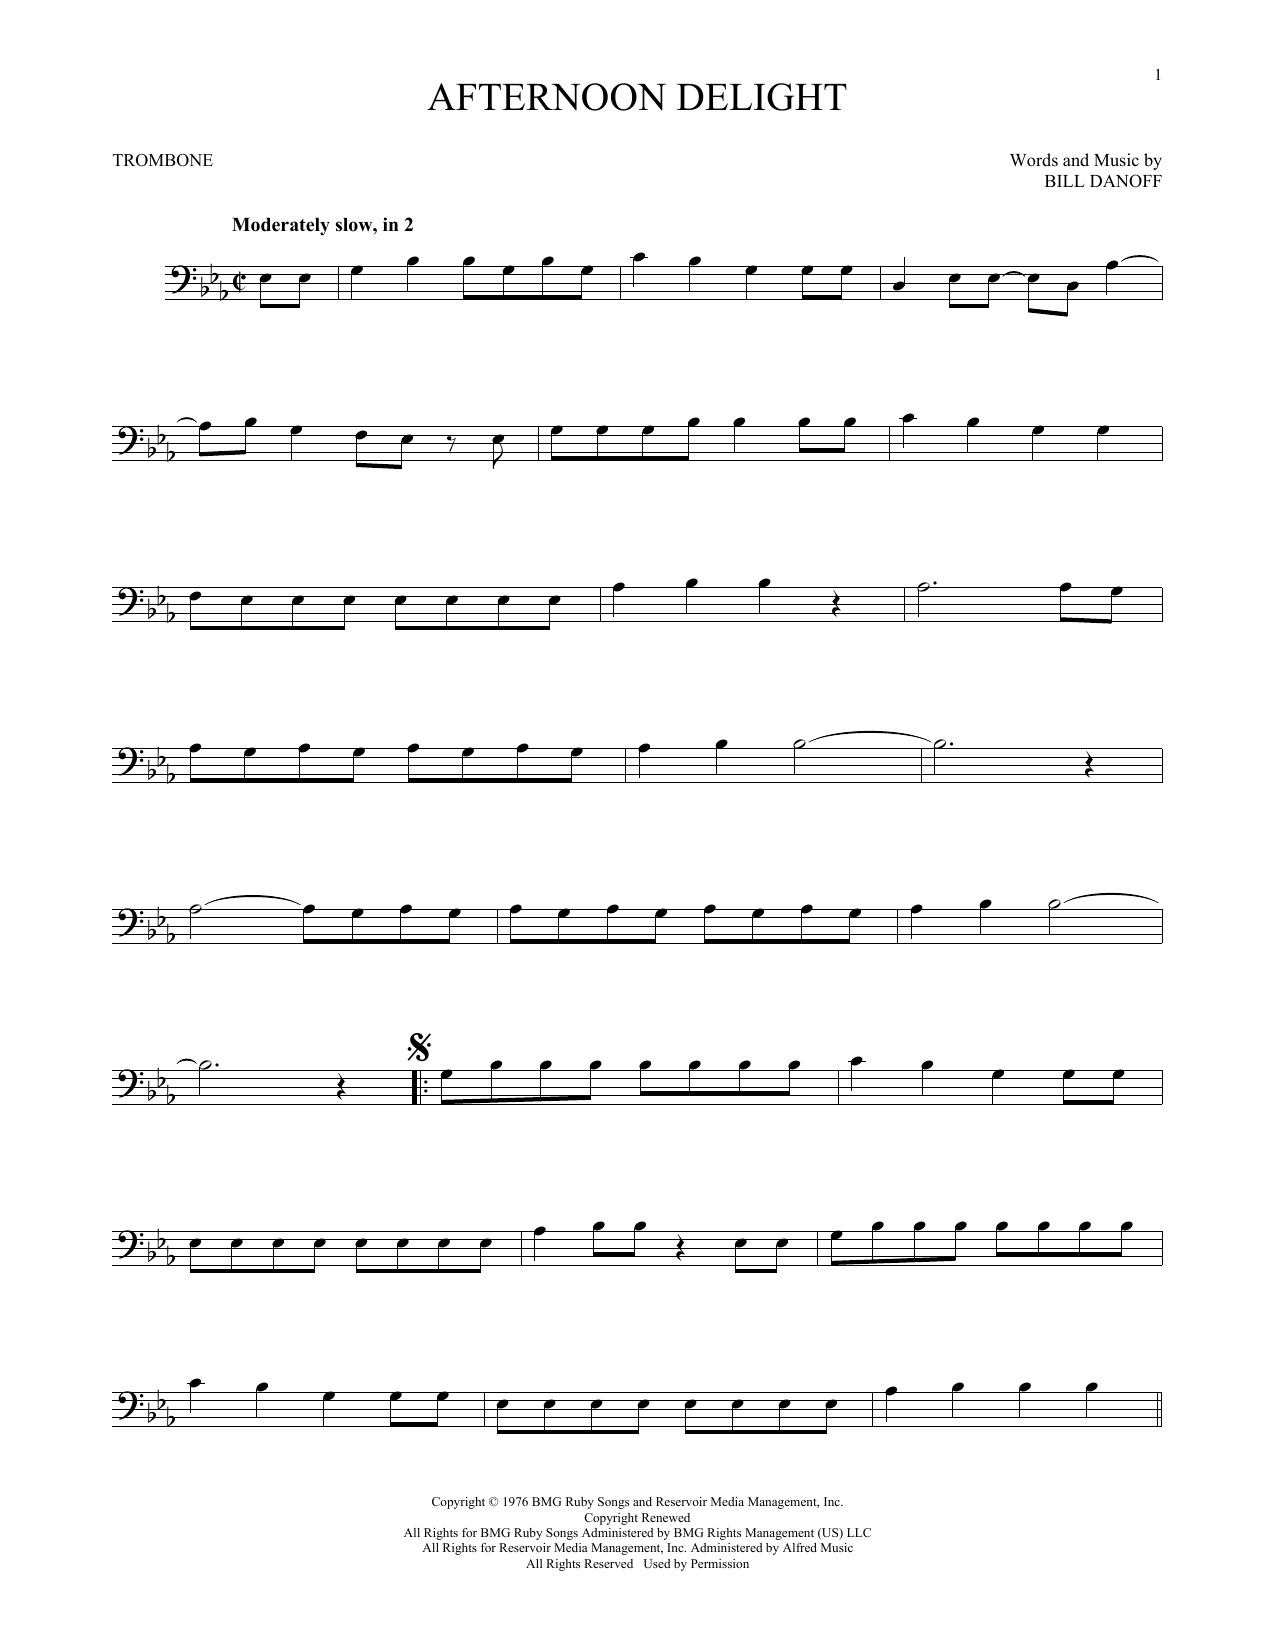 Download Starland Vocal Band Afternoon Delight Sheet Music